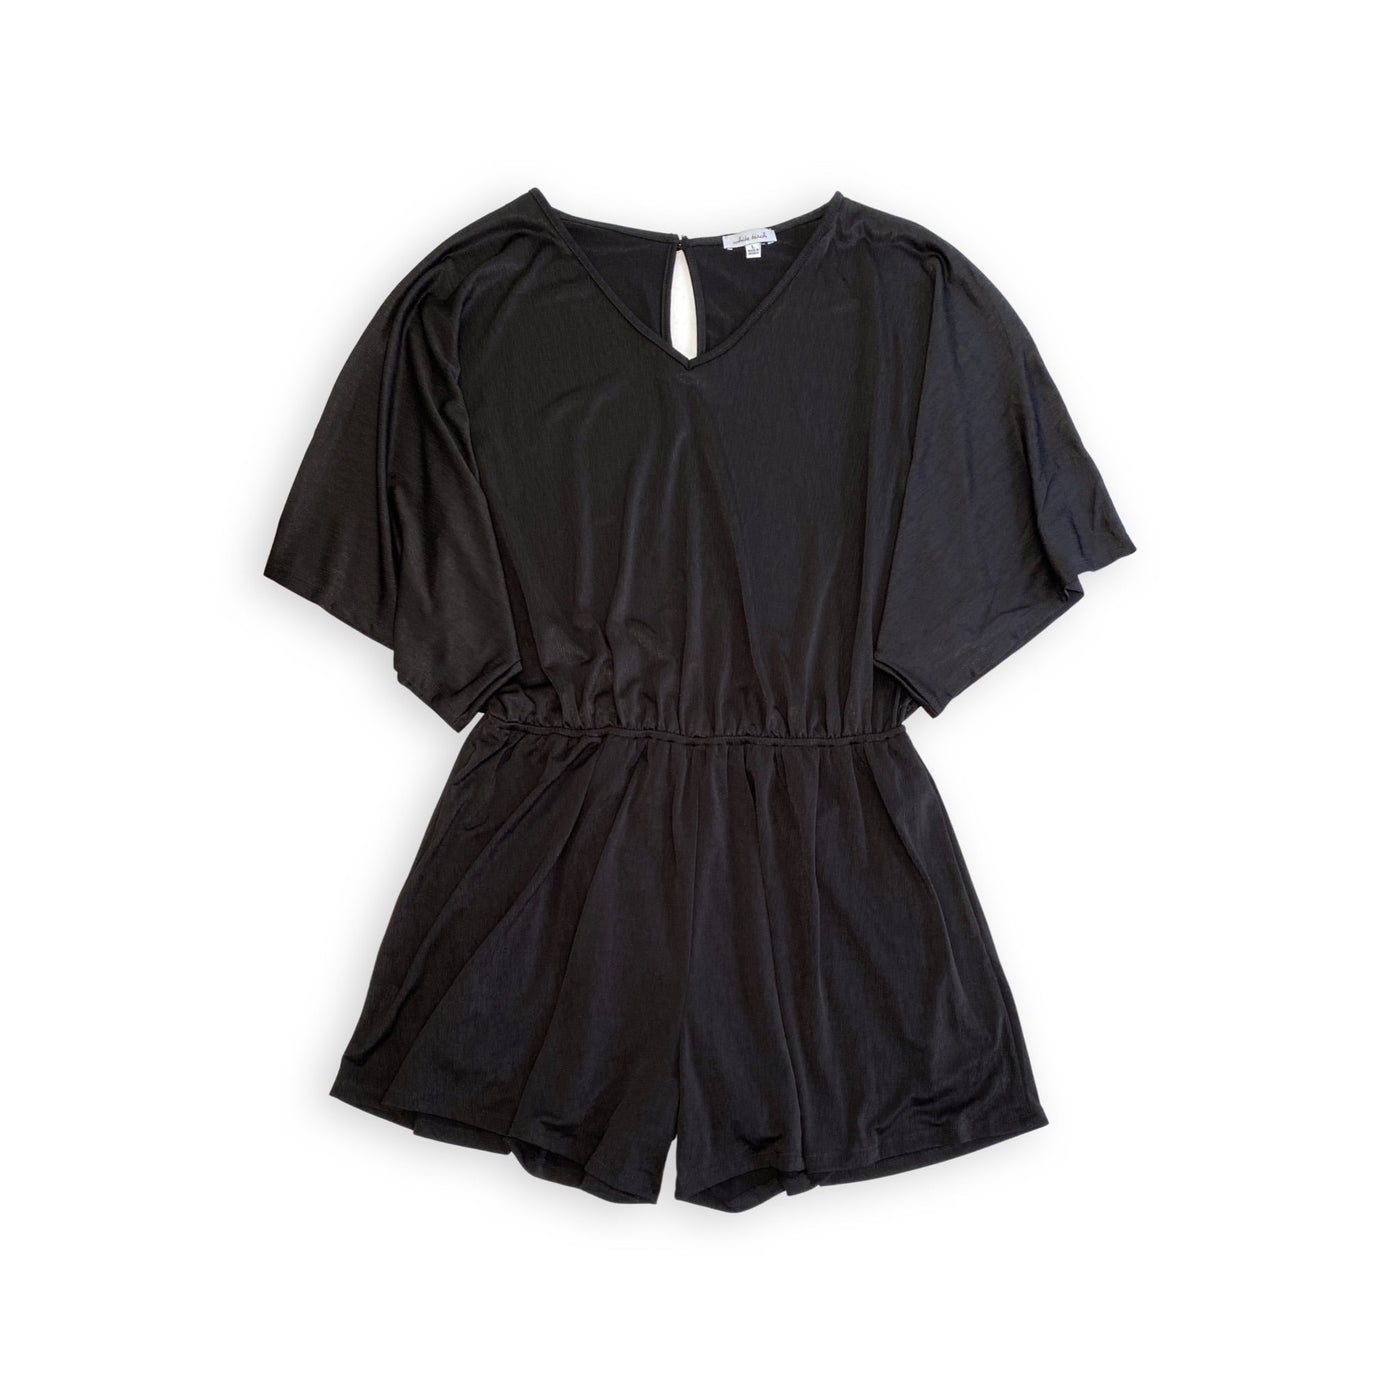 Without Limits Romper